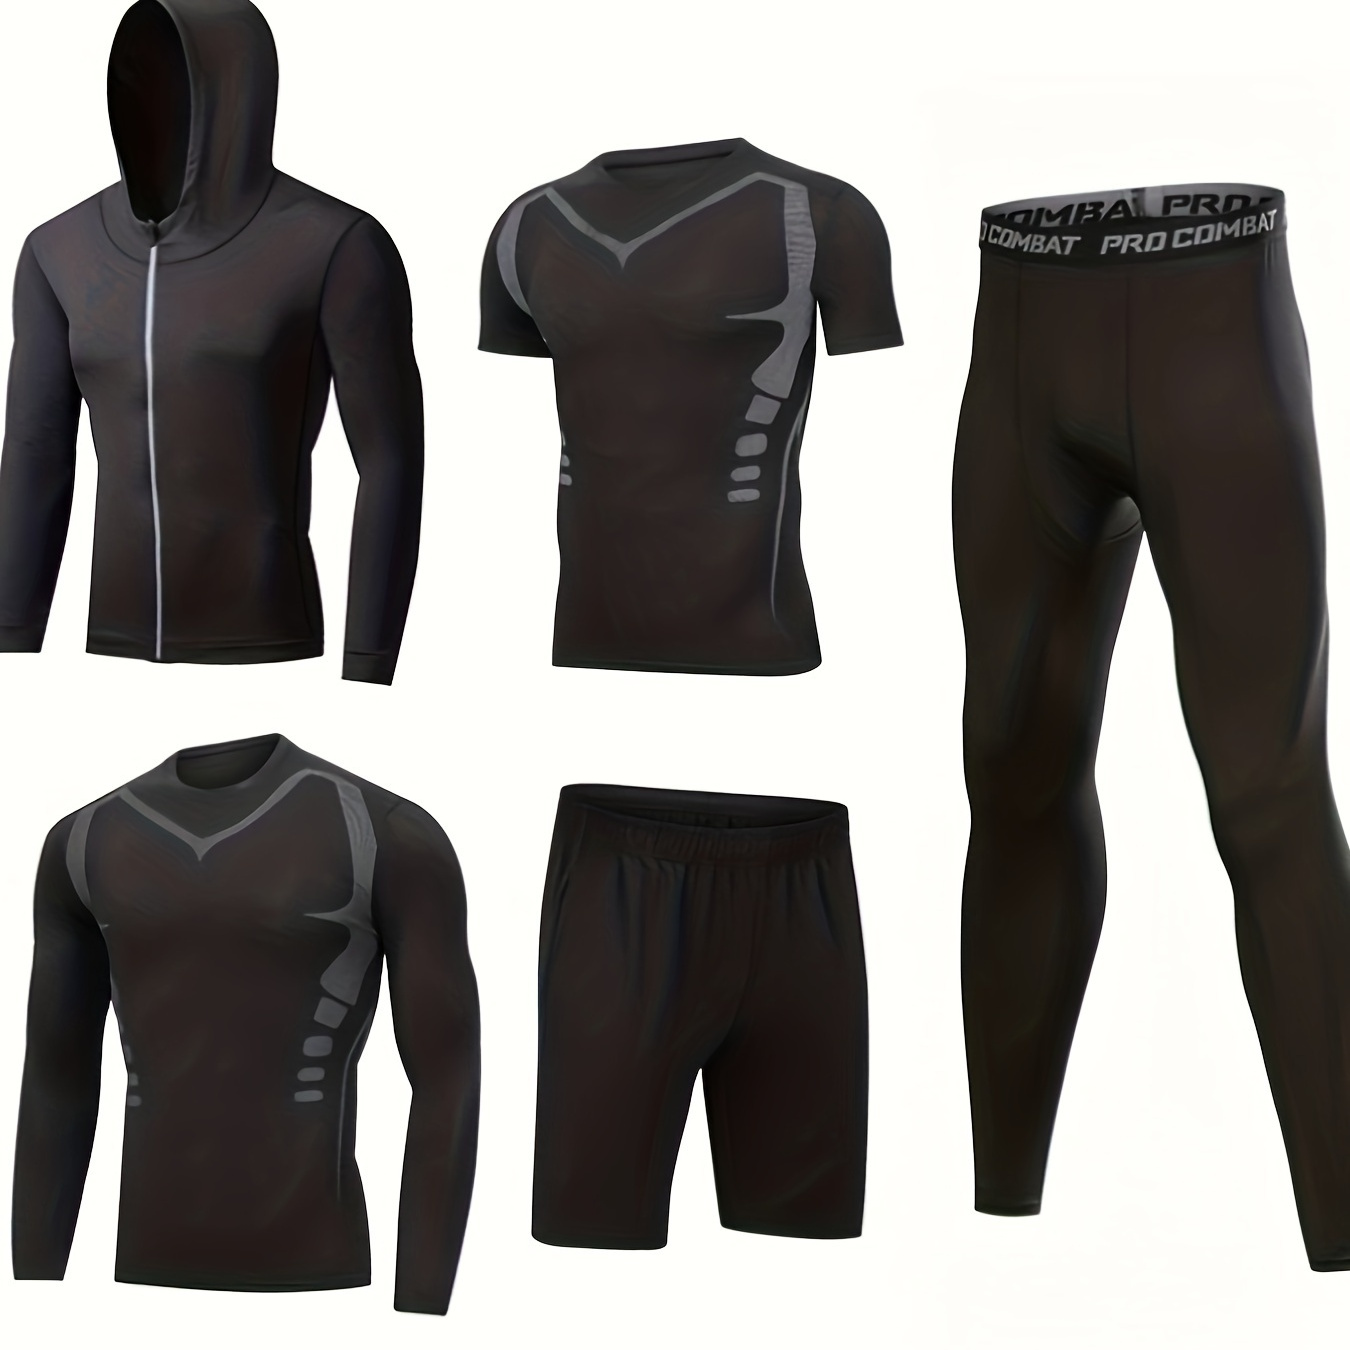 

5-piece Men's Solid Quick-drying Training Suit Set, Zip Up Long Sleeve Hooded Jacket & Active Leggings & Short Sleeve T-shirts & Long Sleeve T-shirts & Breathable Shorts